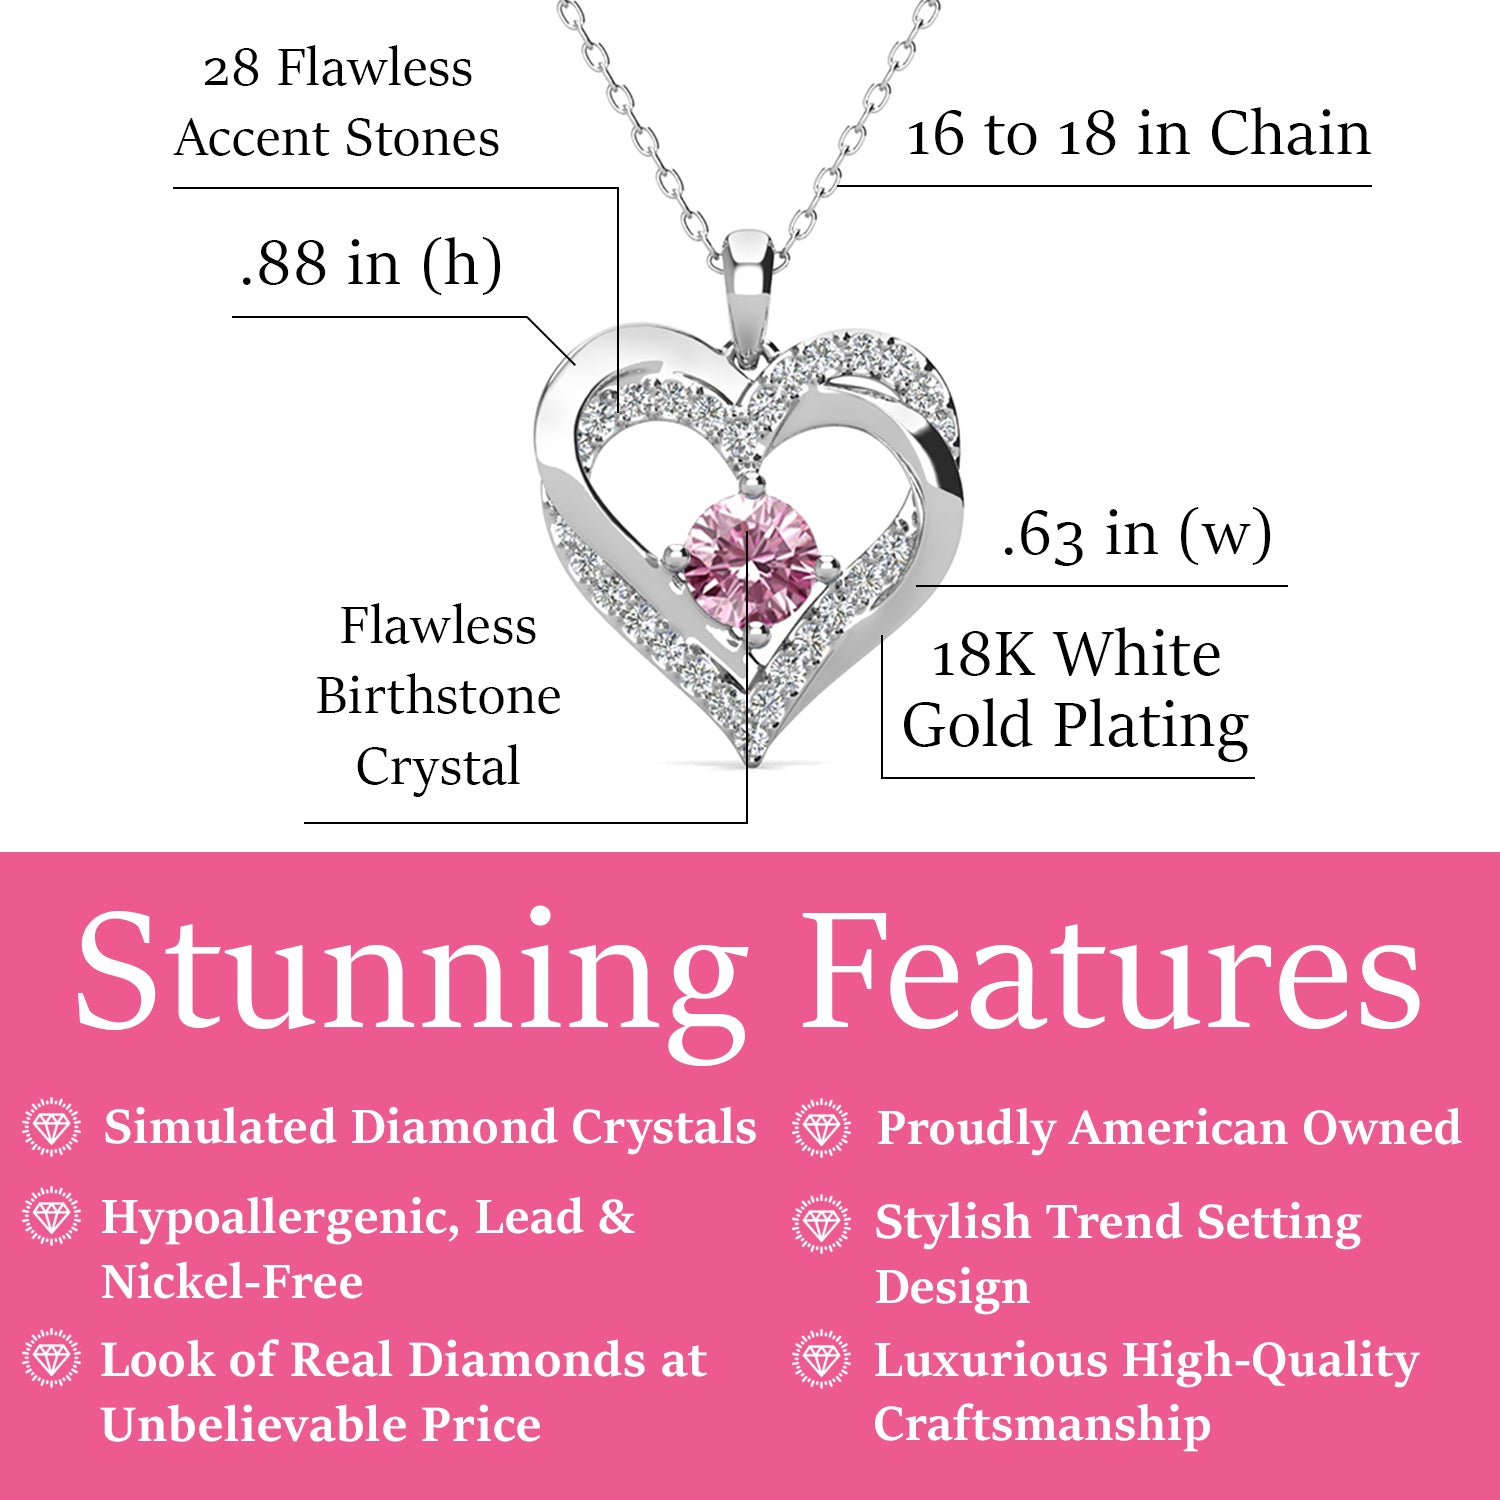 Forever October Birthstone Pink Tourmaline Necklace, 18k White Gold Plated Silver Double Heart Crystal Necklace